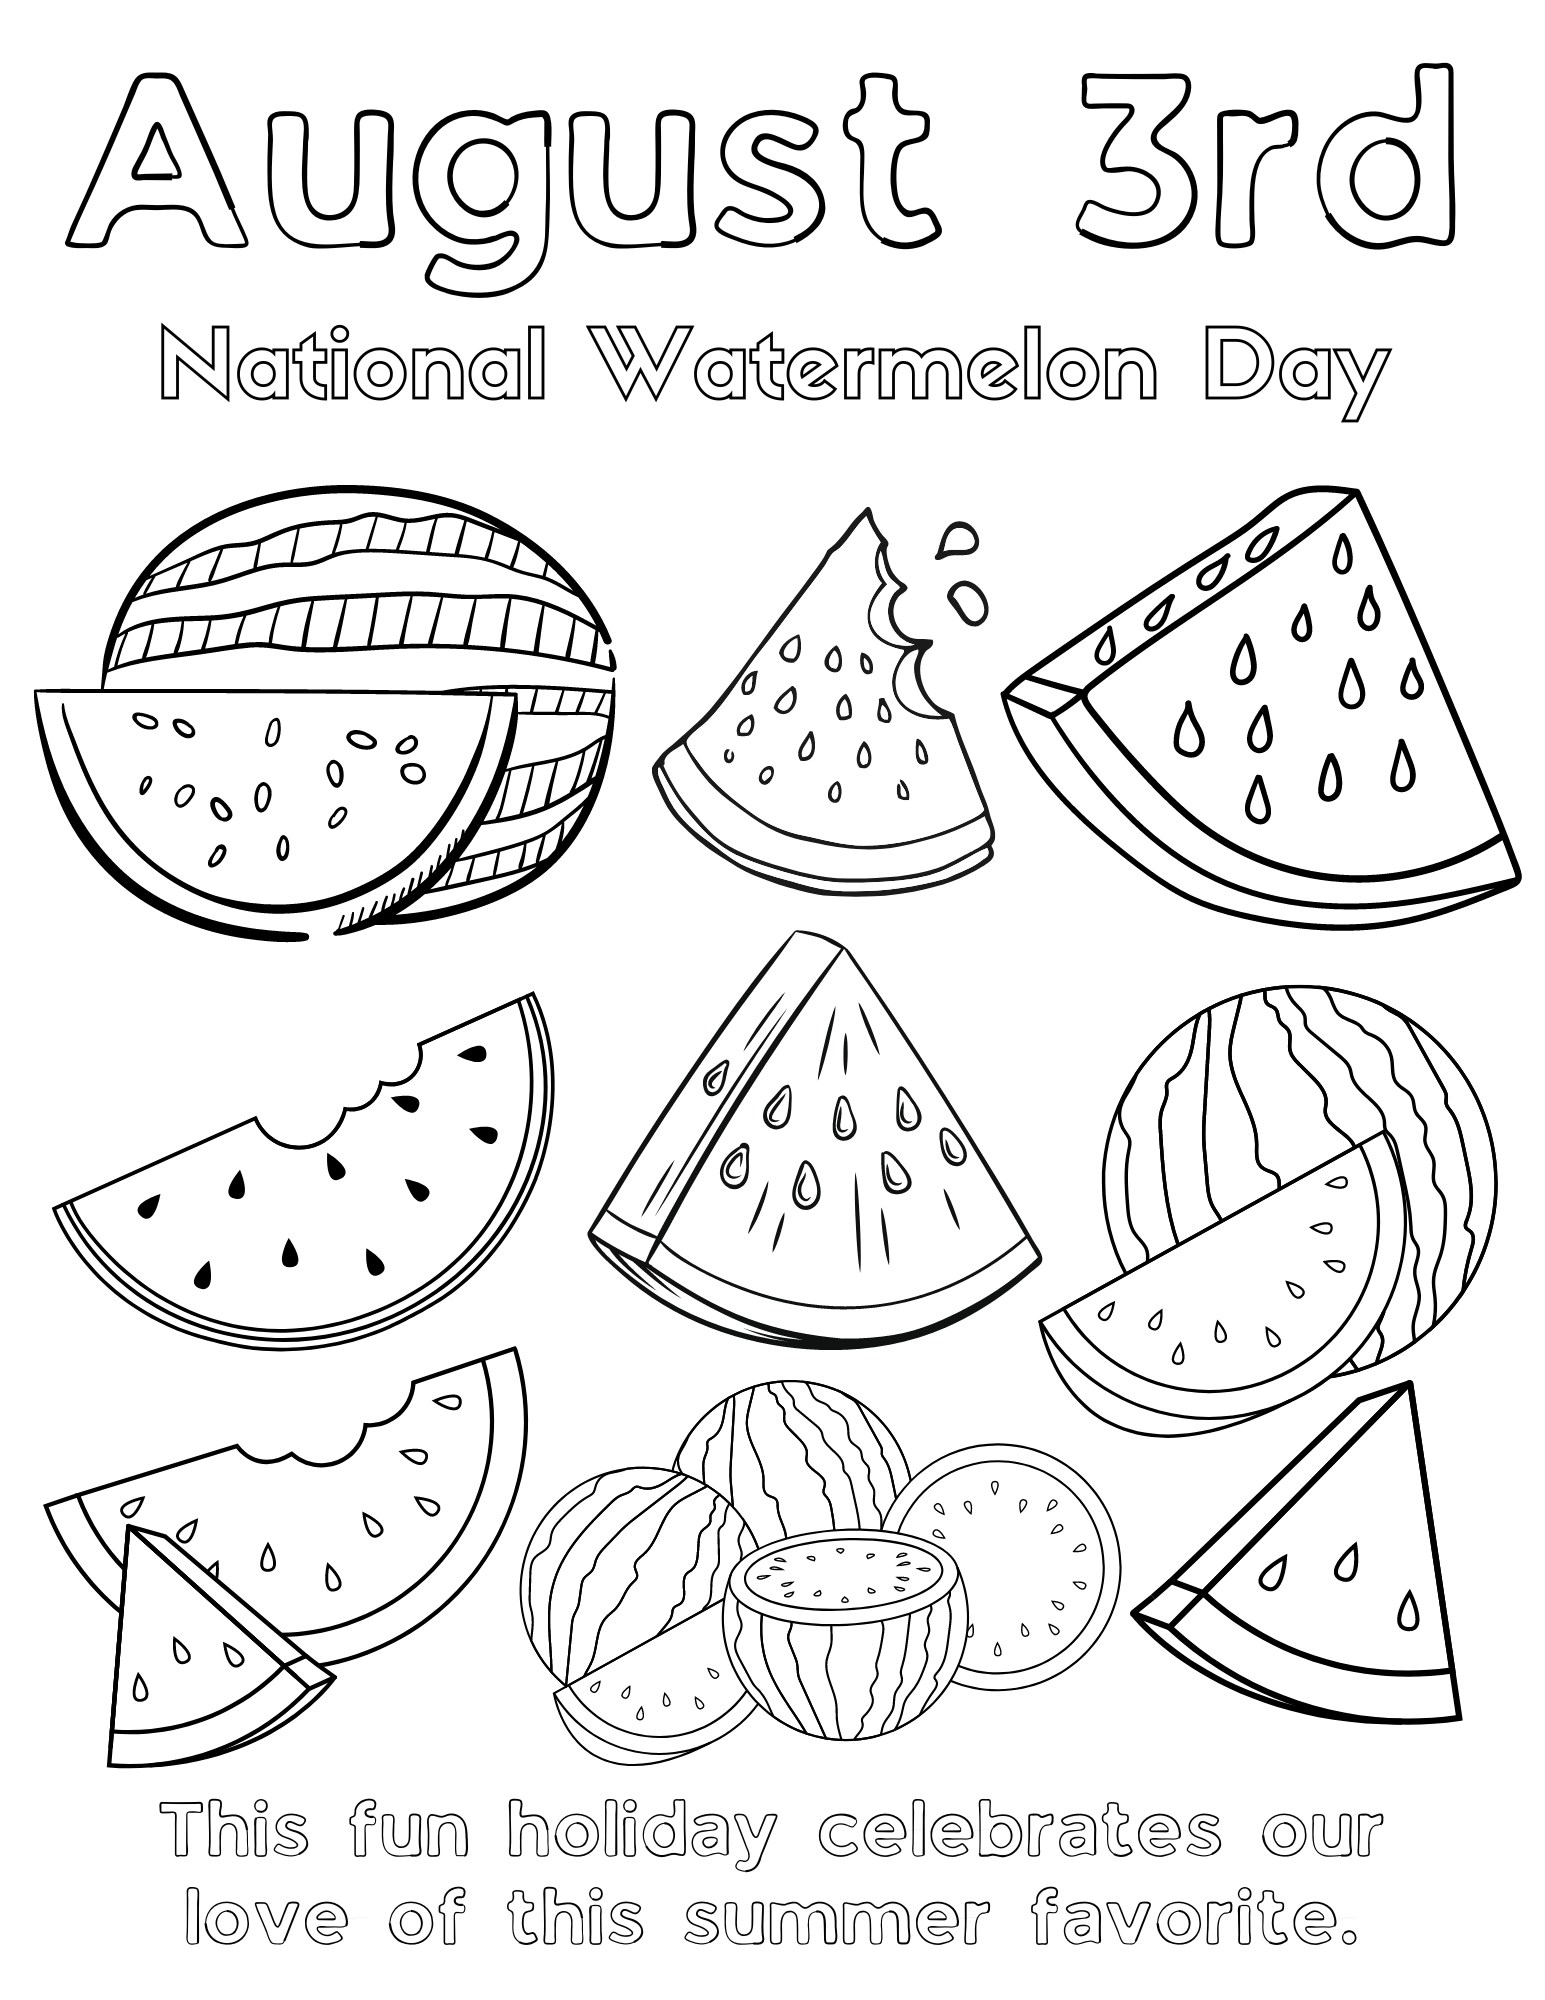 Free august coloring pages for kids and adults